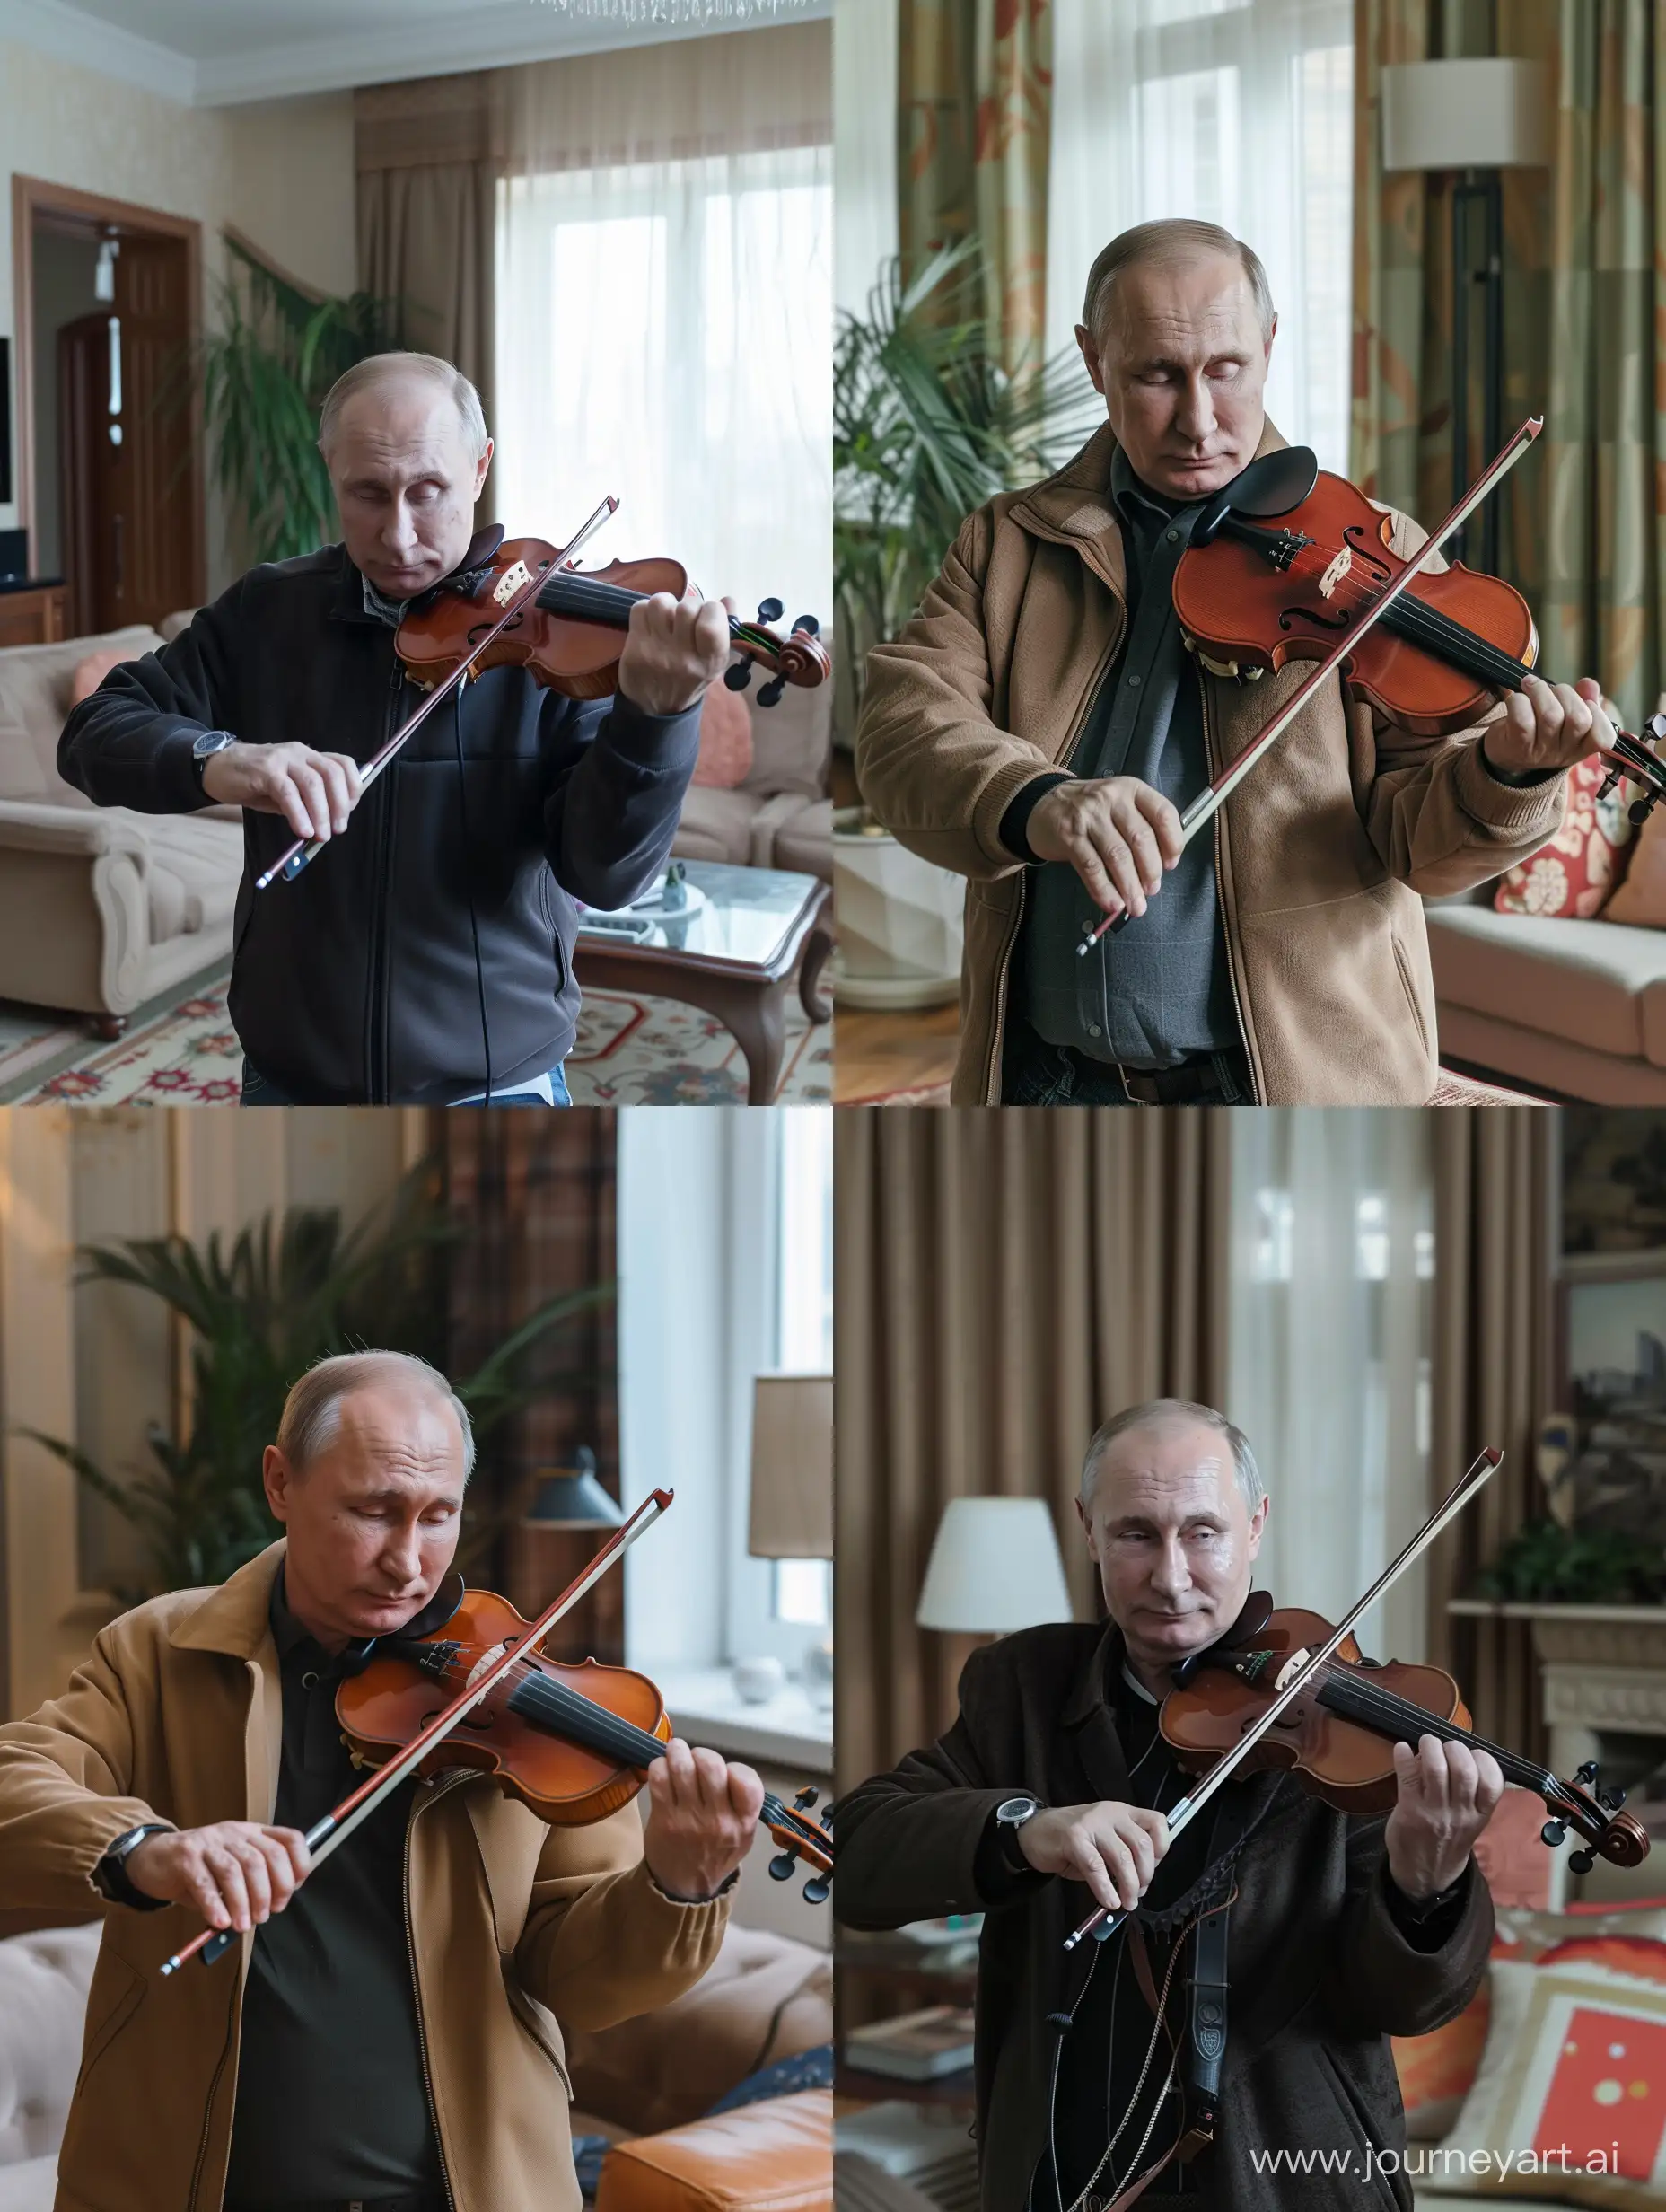 Phone photo of Vladimir Putin playing violin in a living room. He is facing the camera/ viewer. The photo was posted in 2018 on Reddit.